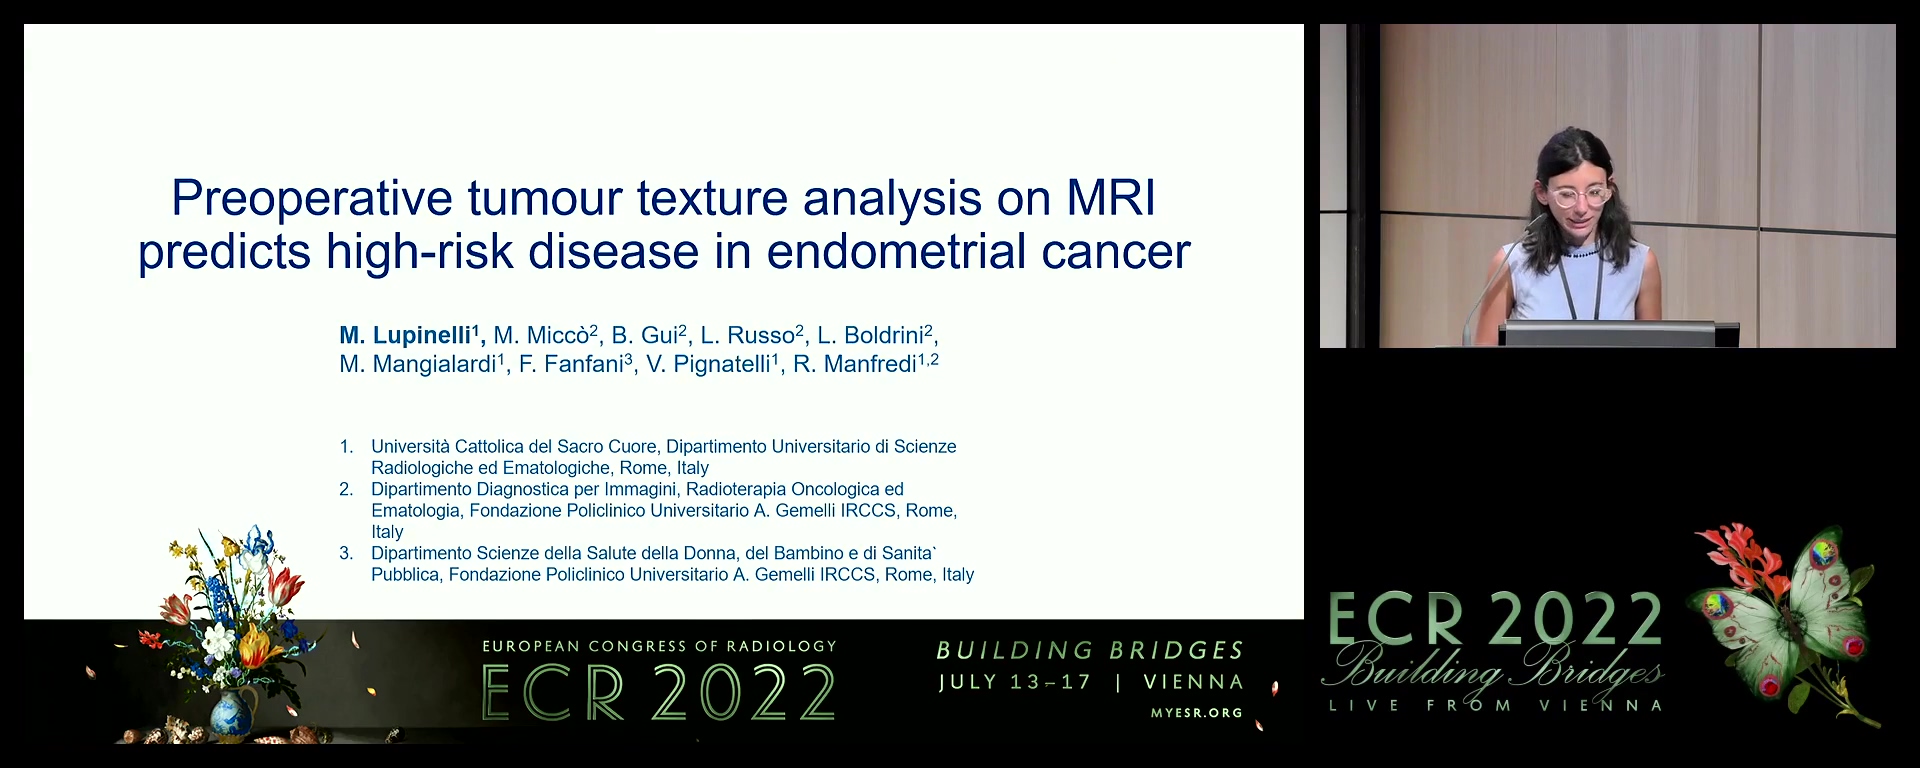 Preoperative tumour texture analysis on MRI predicts high-risk disease in endometrial cancer - Michela Lupinelli, Forli / IT